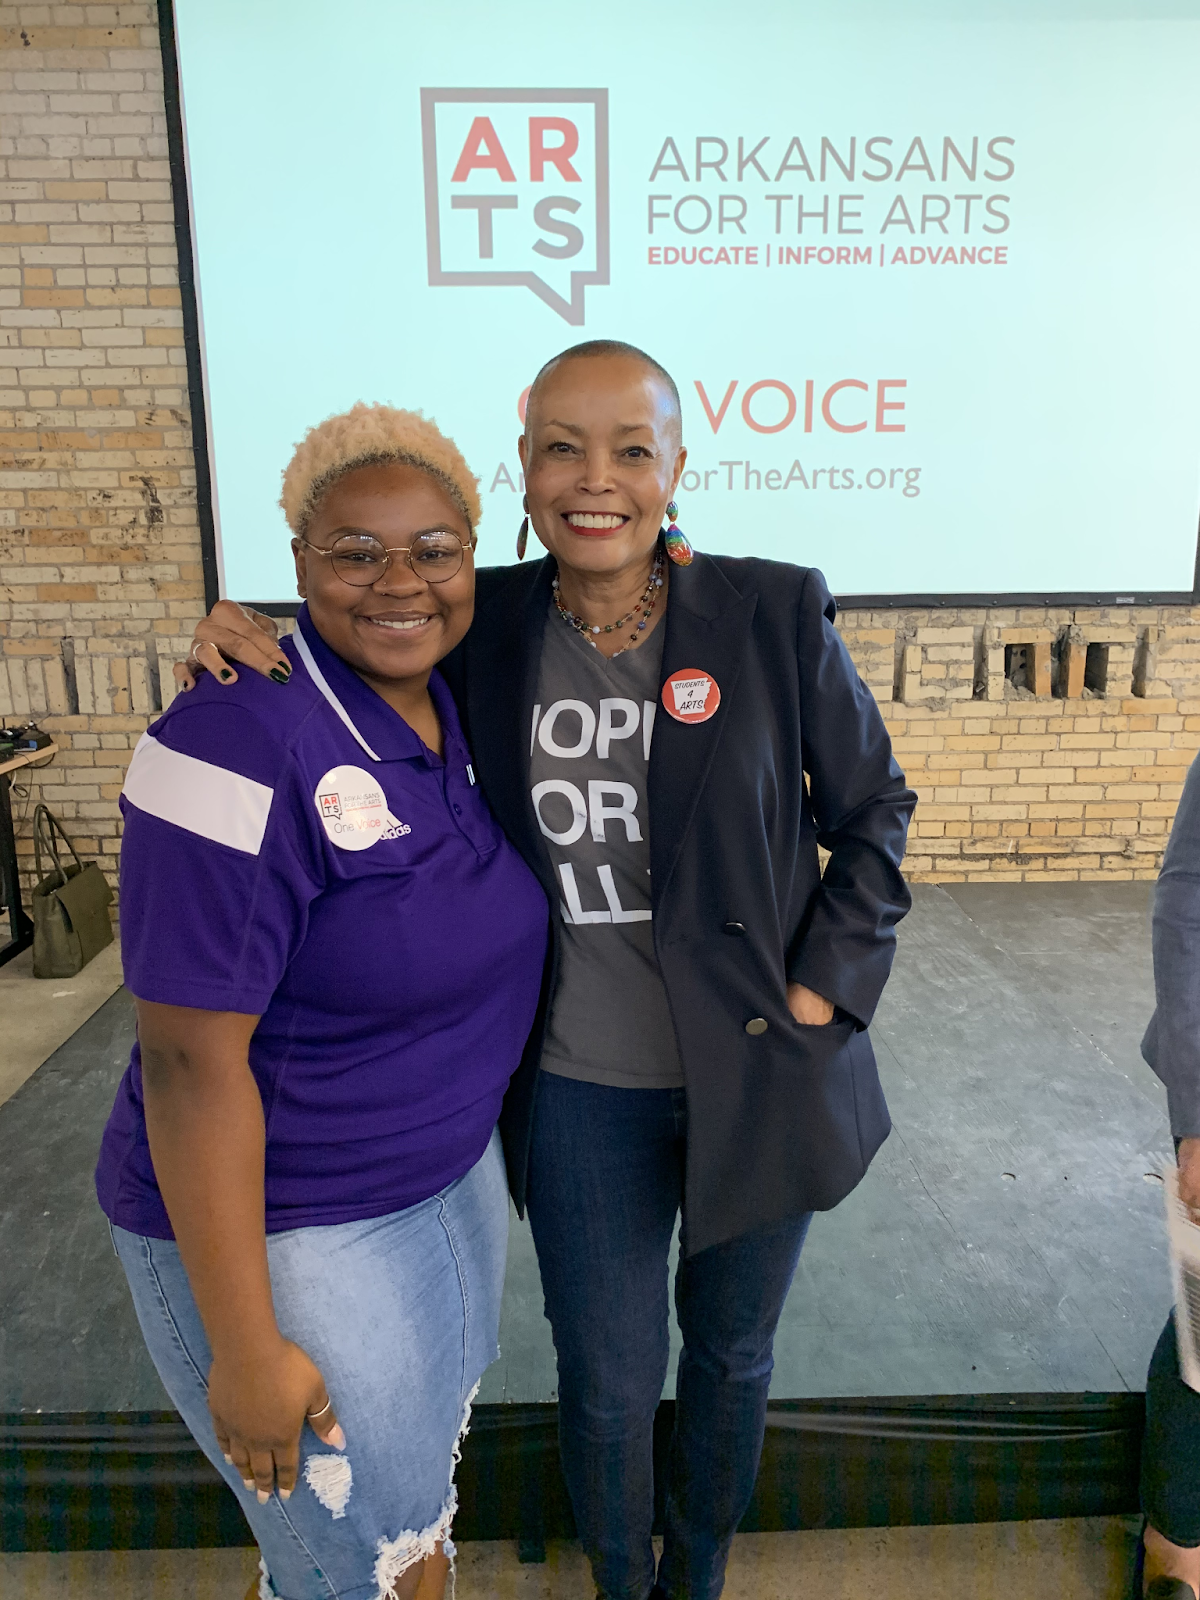 A college students in purple UCA shirt poses with state senator Joyce Elliot in front of a projector screen with the Arkansans for the Arts logo displayed prominently.